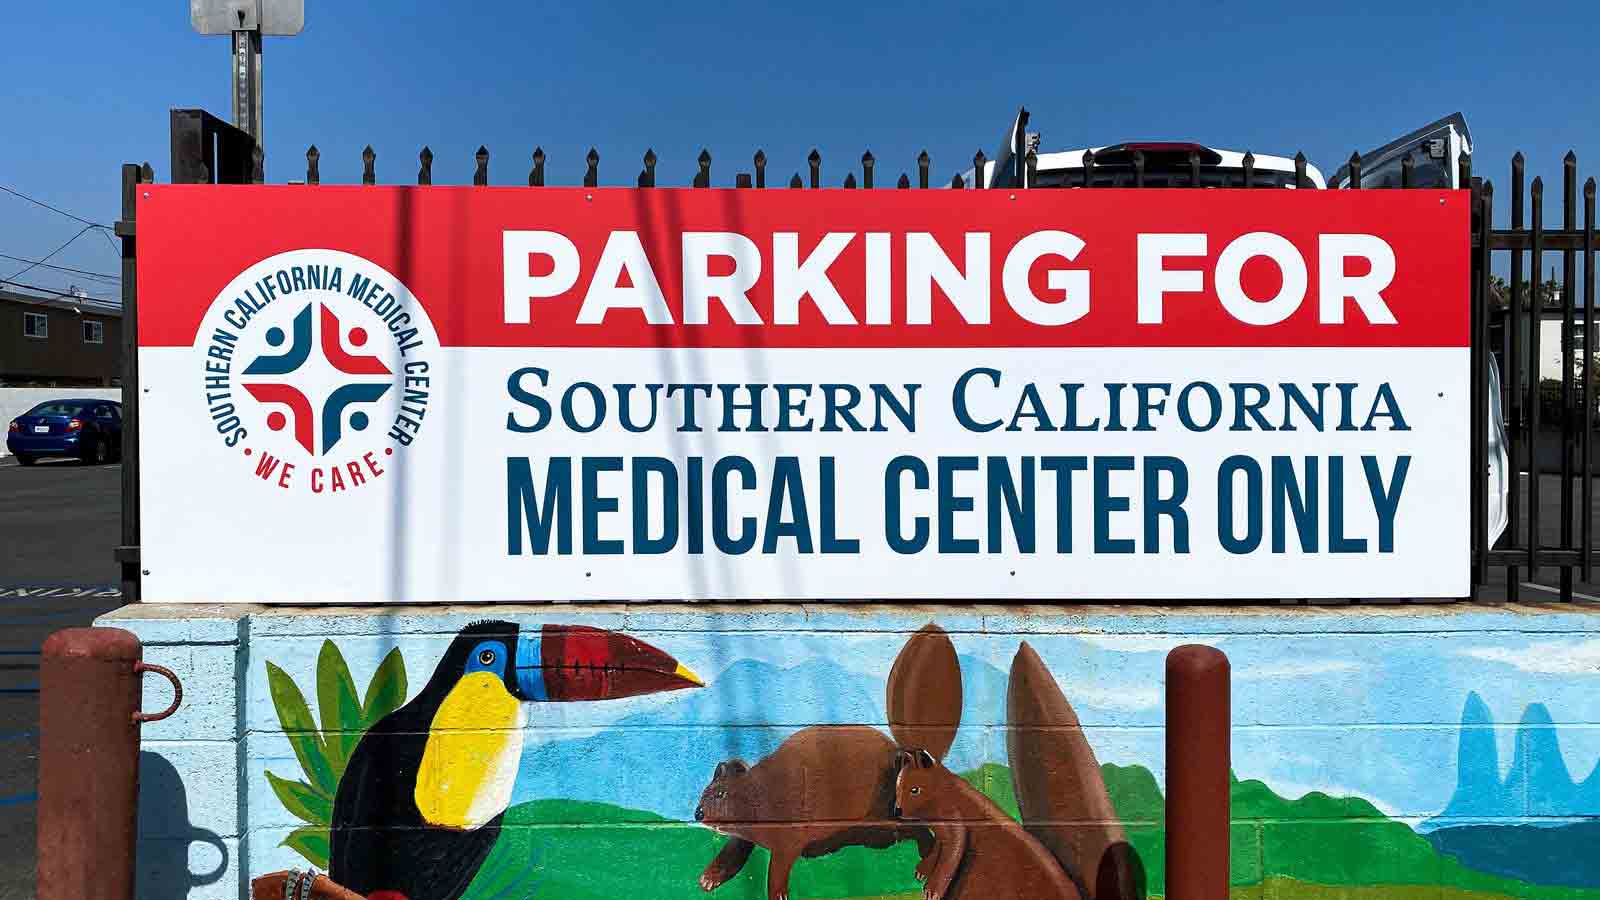 southern california medical center parking sign